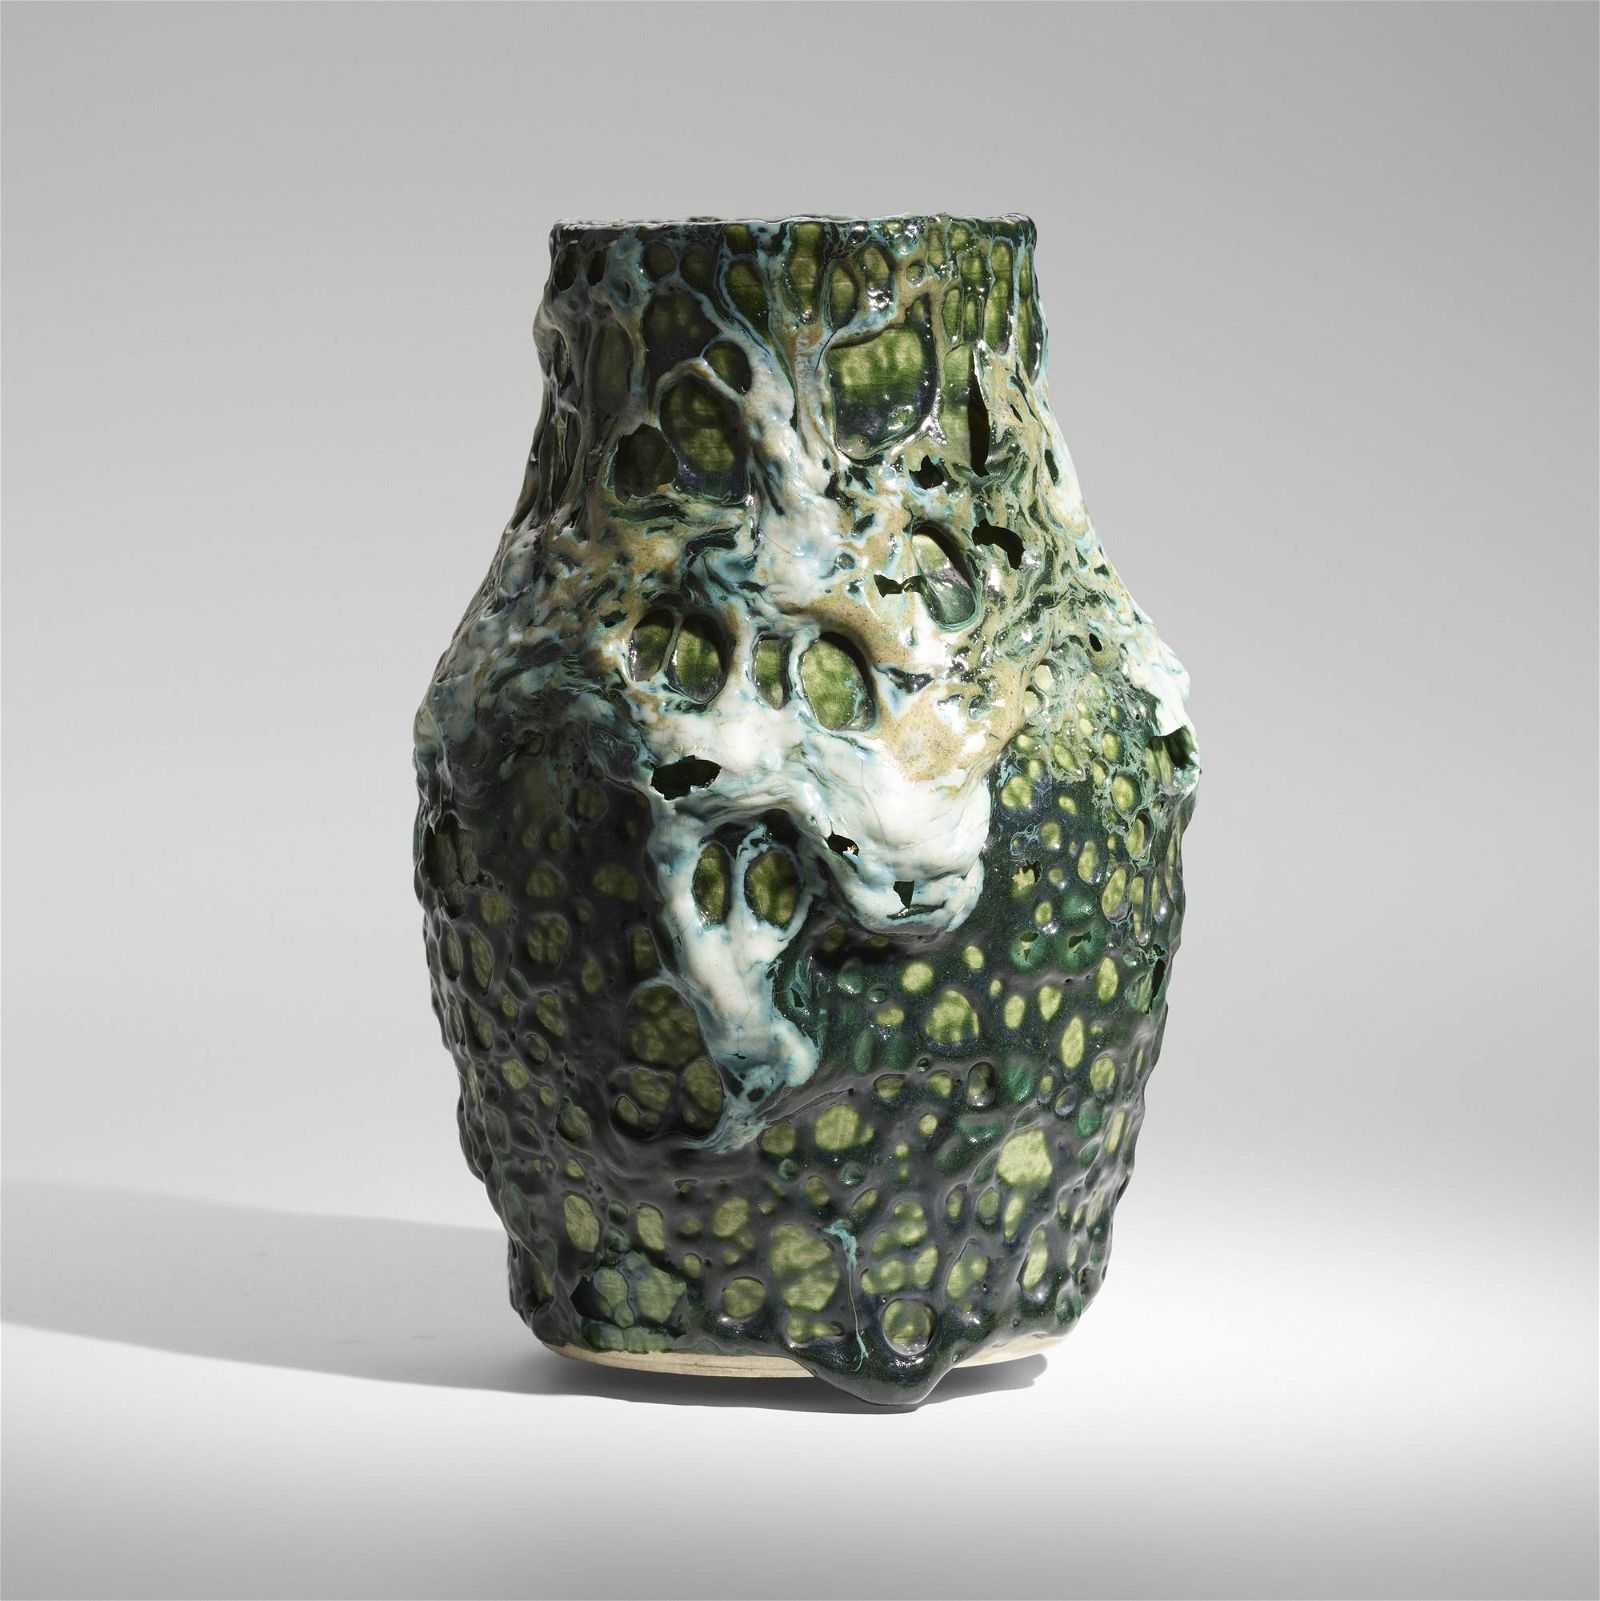 This Dedham Pottery vase with volcanic glaze brought $13,000 plus the buyer’s premium in February 2023. Image courtesy of Rago Arts and Auction Center and LiveAuctioneers.